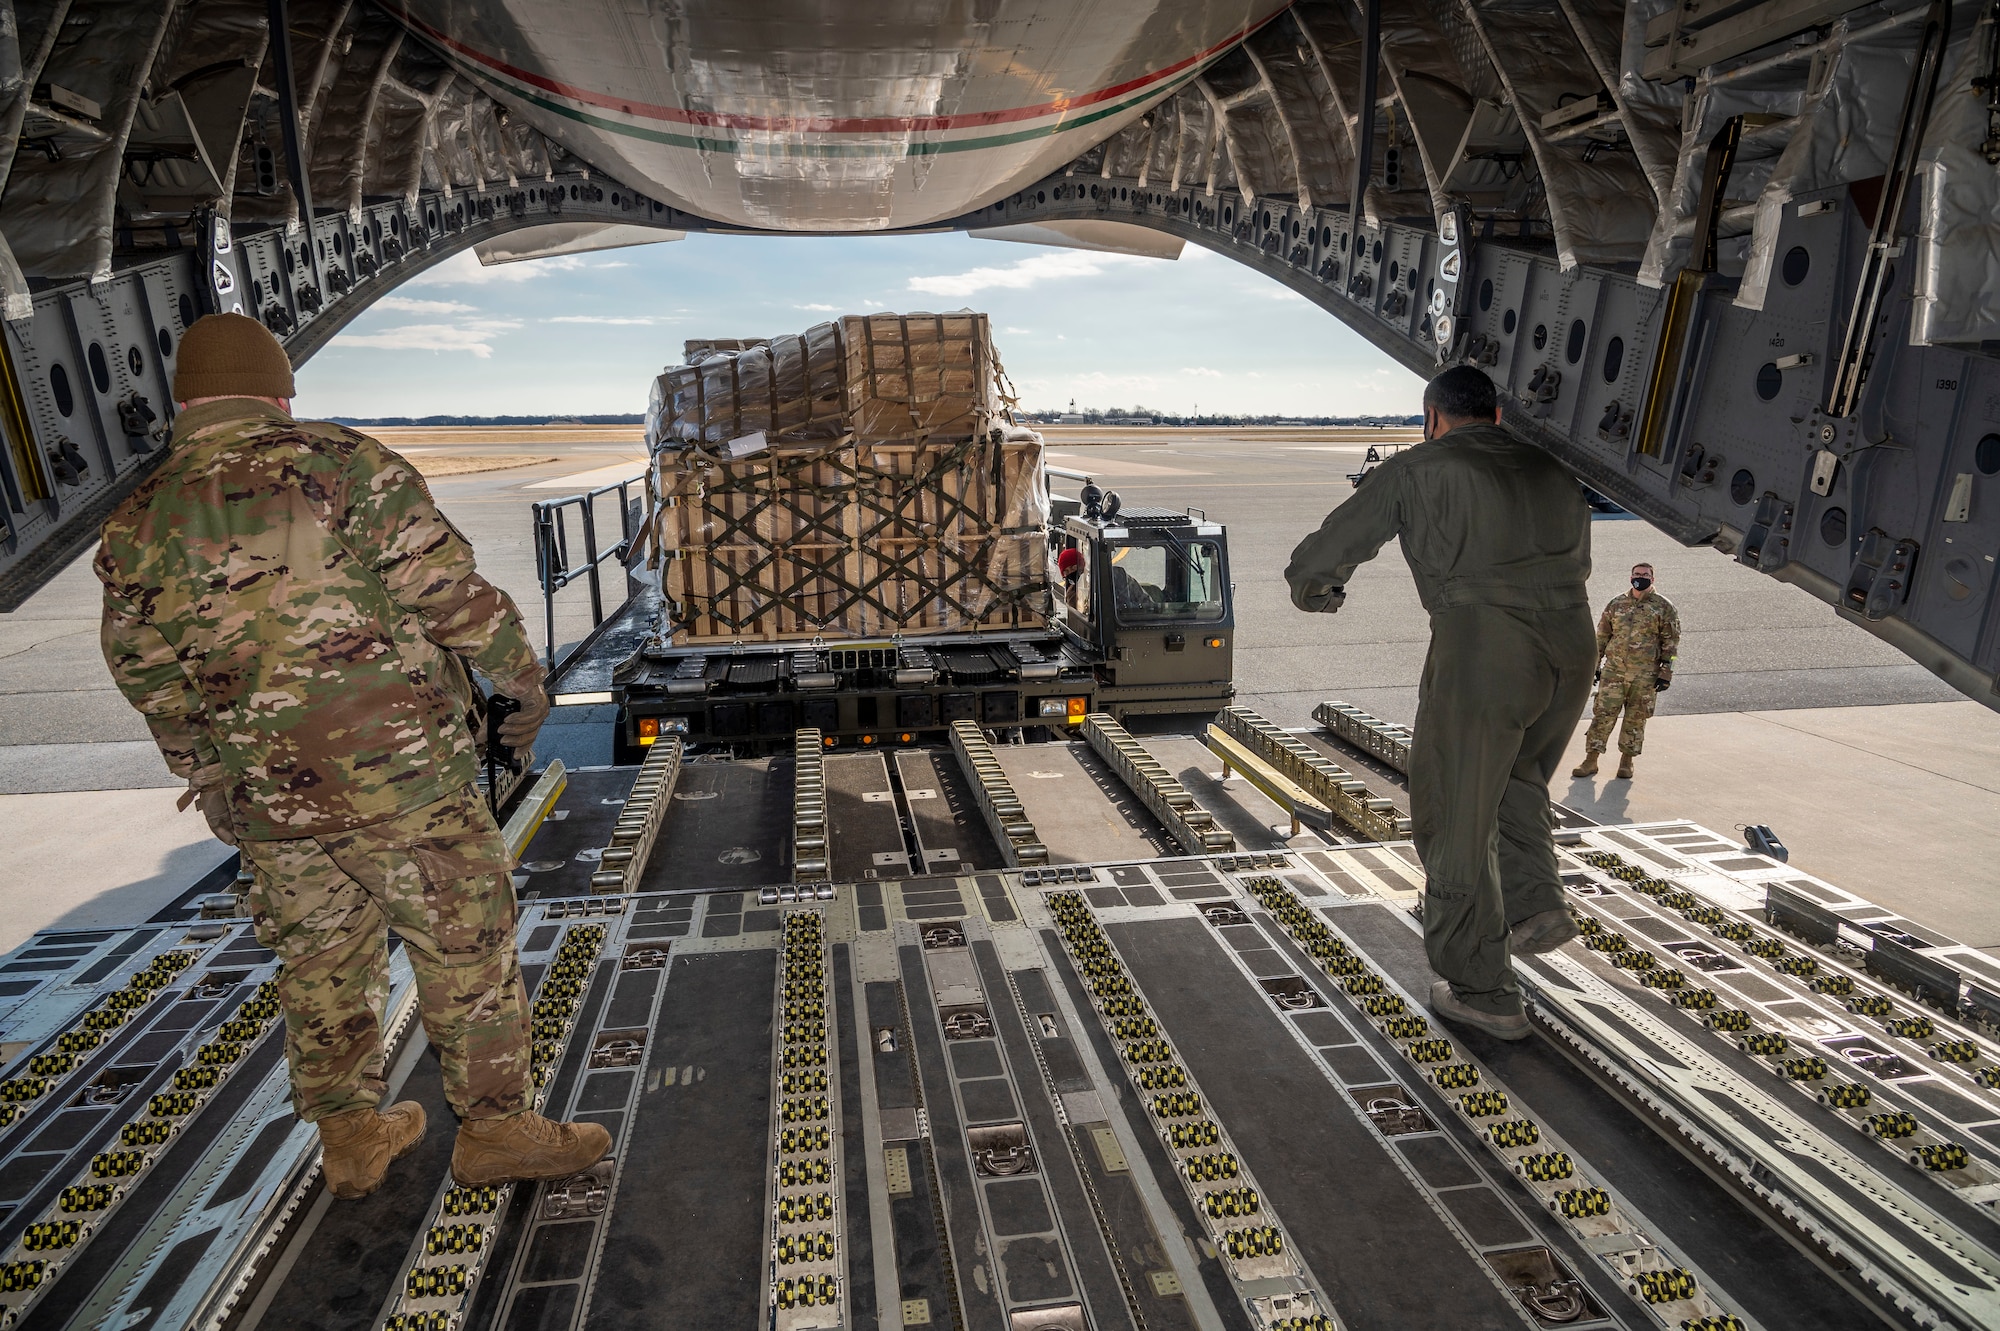 A Kuwait air force airman guides a K-loader onto the ramp of a Kuwait air force C-17 Globemaster III at Dover Air Force Base, Delaware, Jan. 22, 2021. Kuwait is an important partner in U.S. counterterrorism efforts, providing assistance in the military, diplomatic, and intelligence arenas and also supporting efforts to block financing of terrorist groups. Due to its strategic geographic location, Dover AFB supports approximately $3.5 billion worth of foreign military sales operations annually. (U.S. Air Force photo by Senior Airman Christopher Quail)